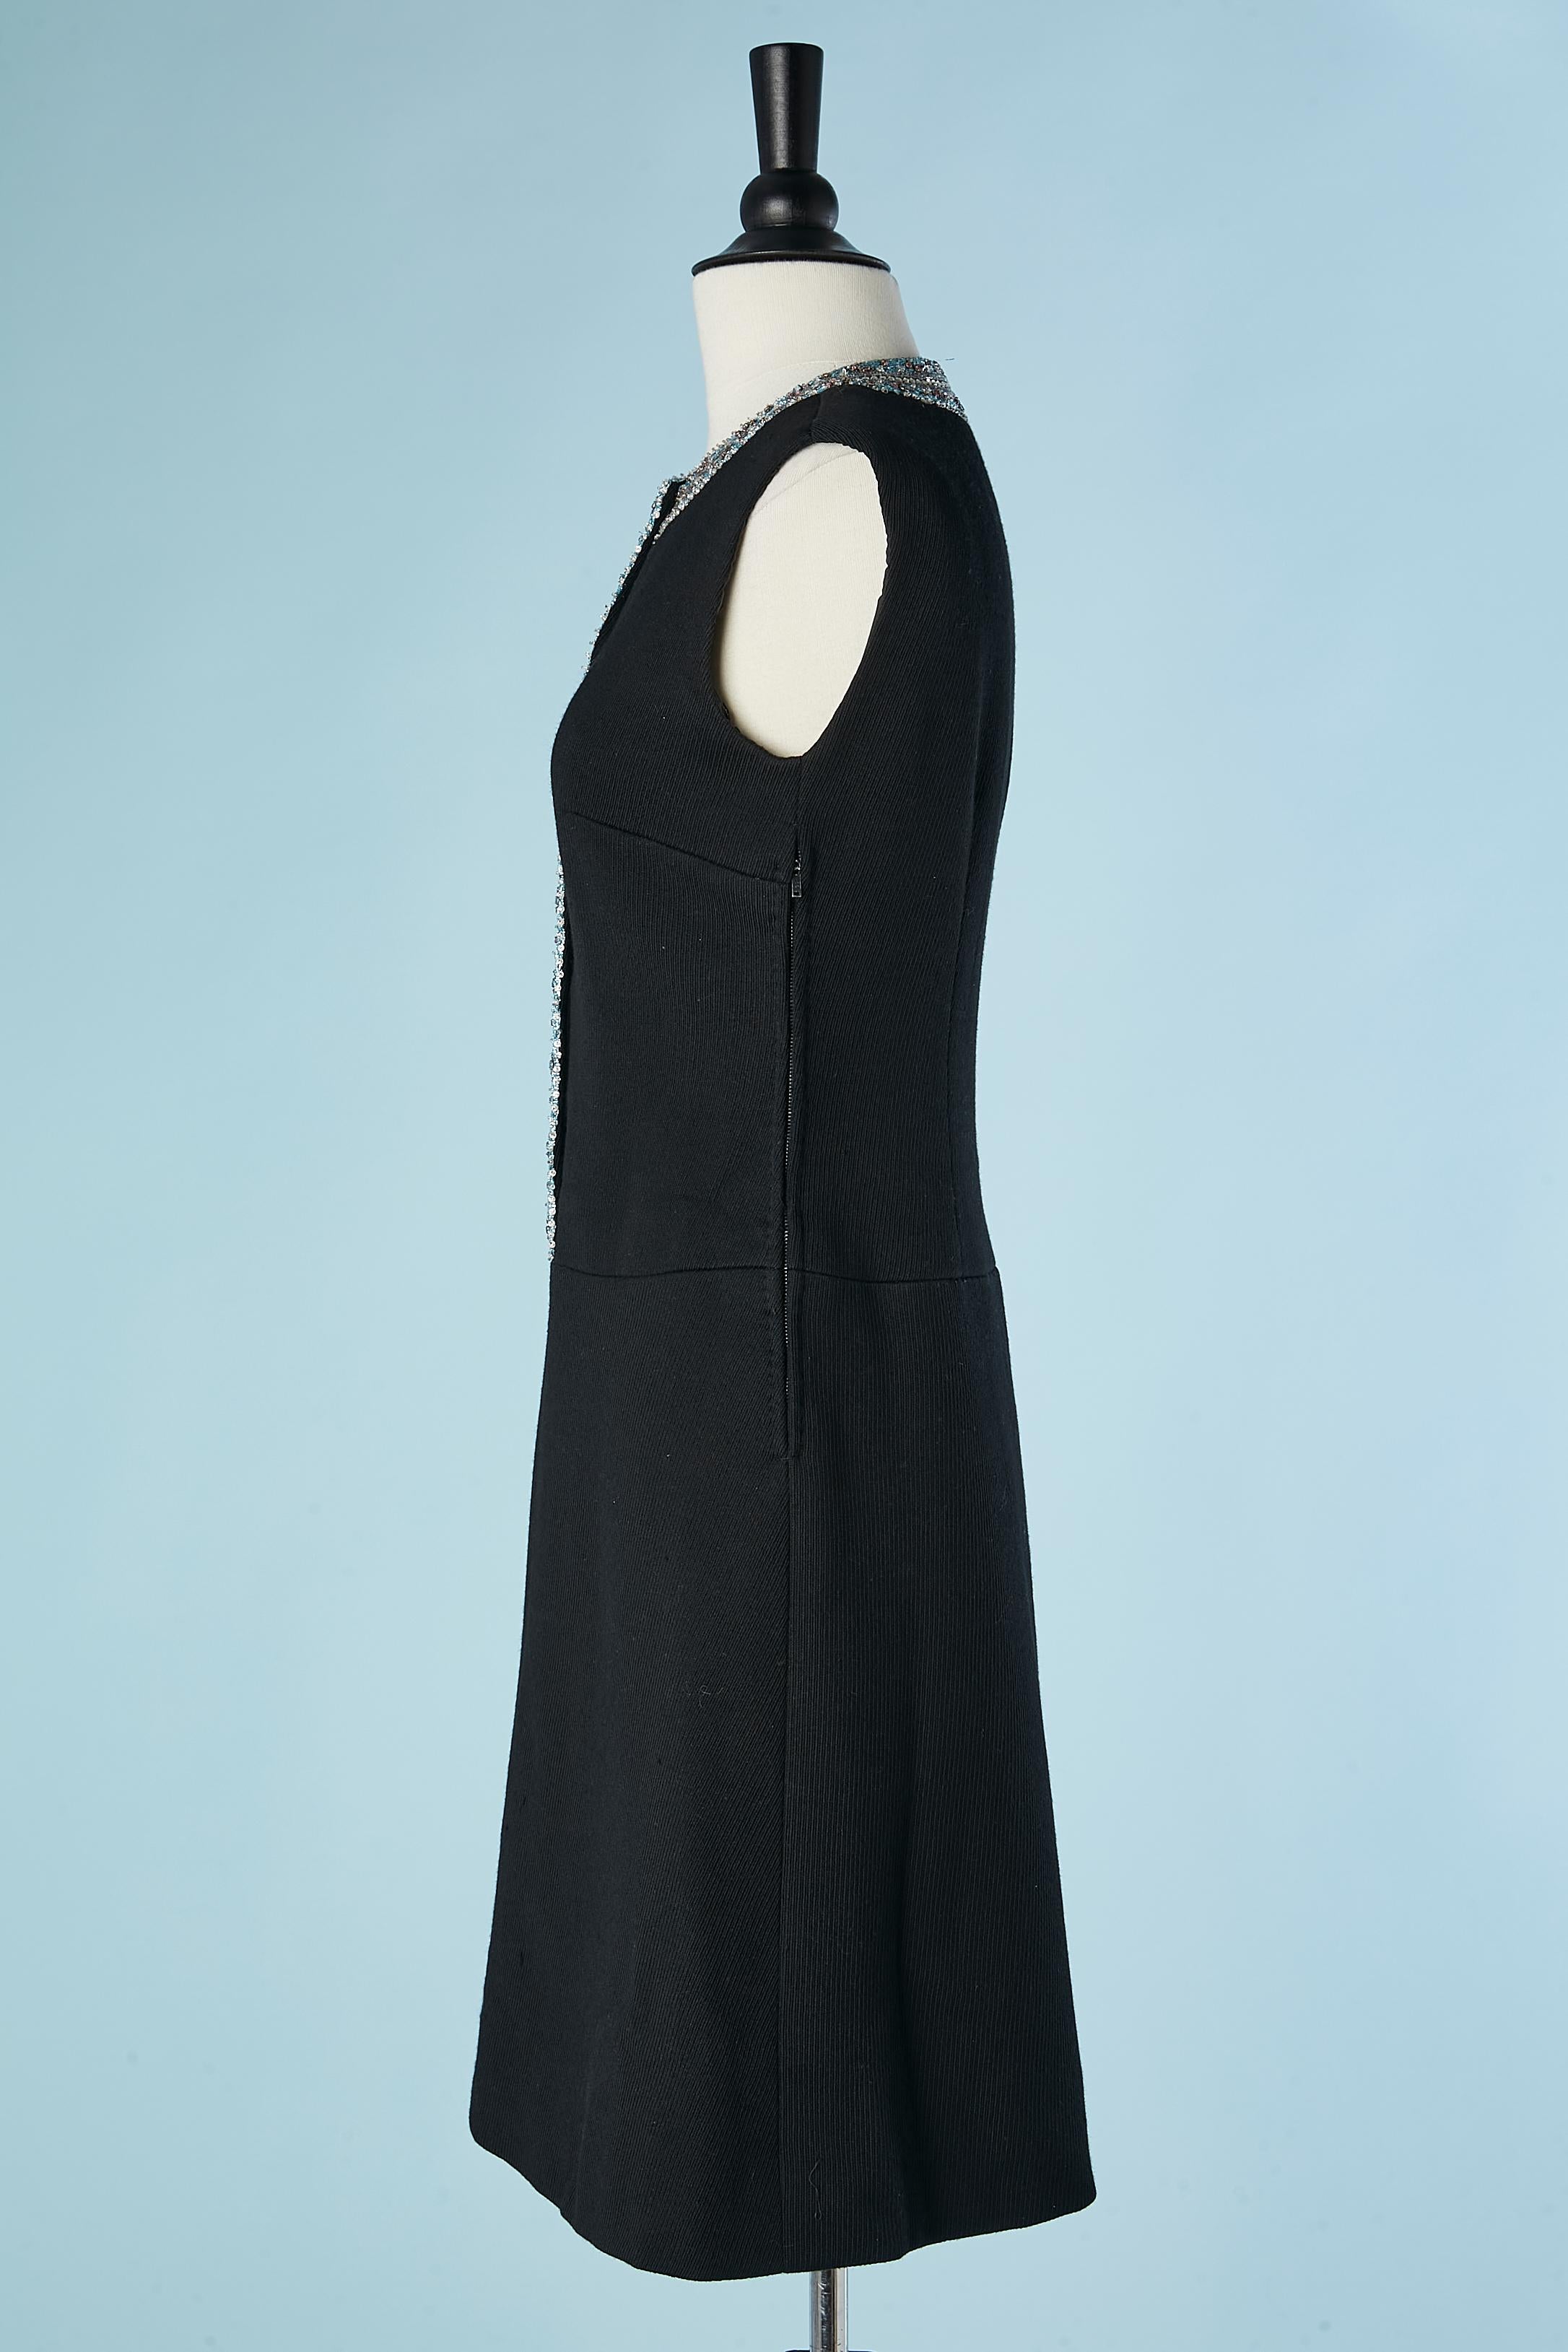 Black wool jacket and dress cocktail ensemble Anna Belletti Roma Circa 1960's For Sale 7